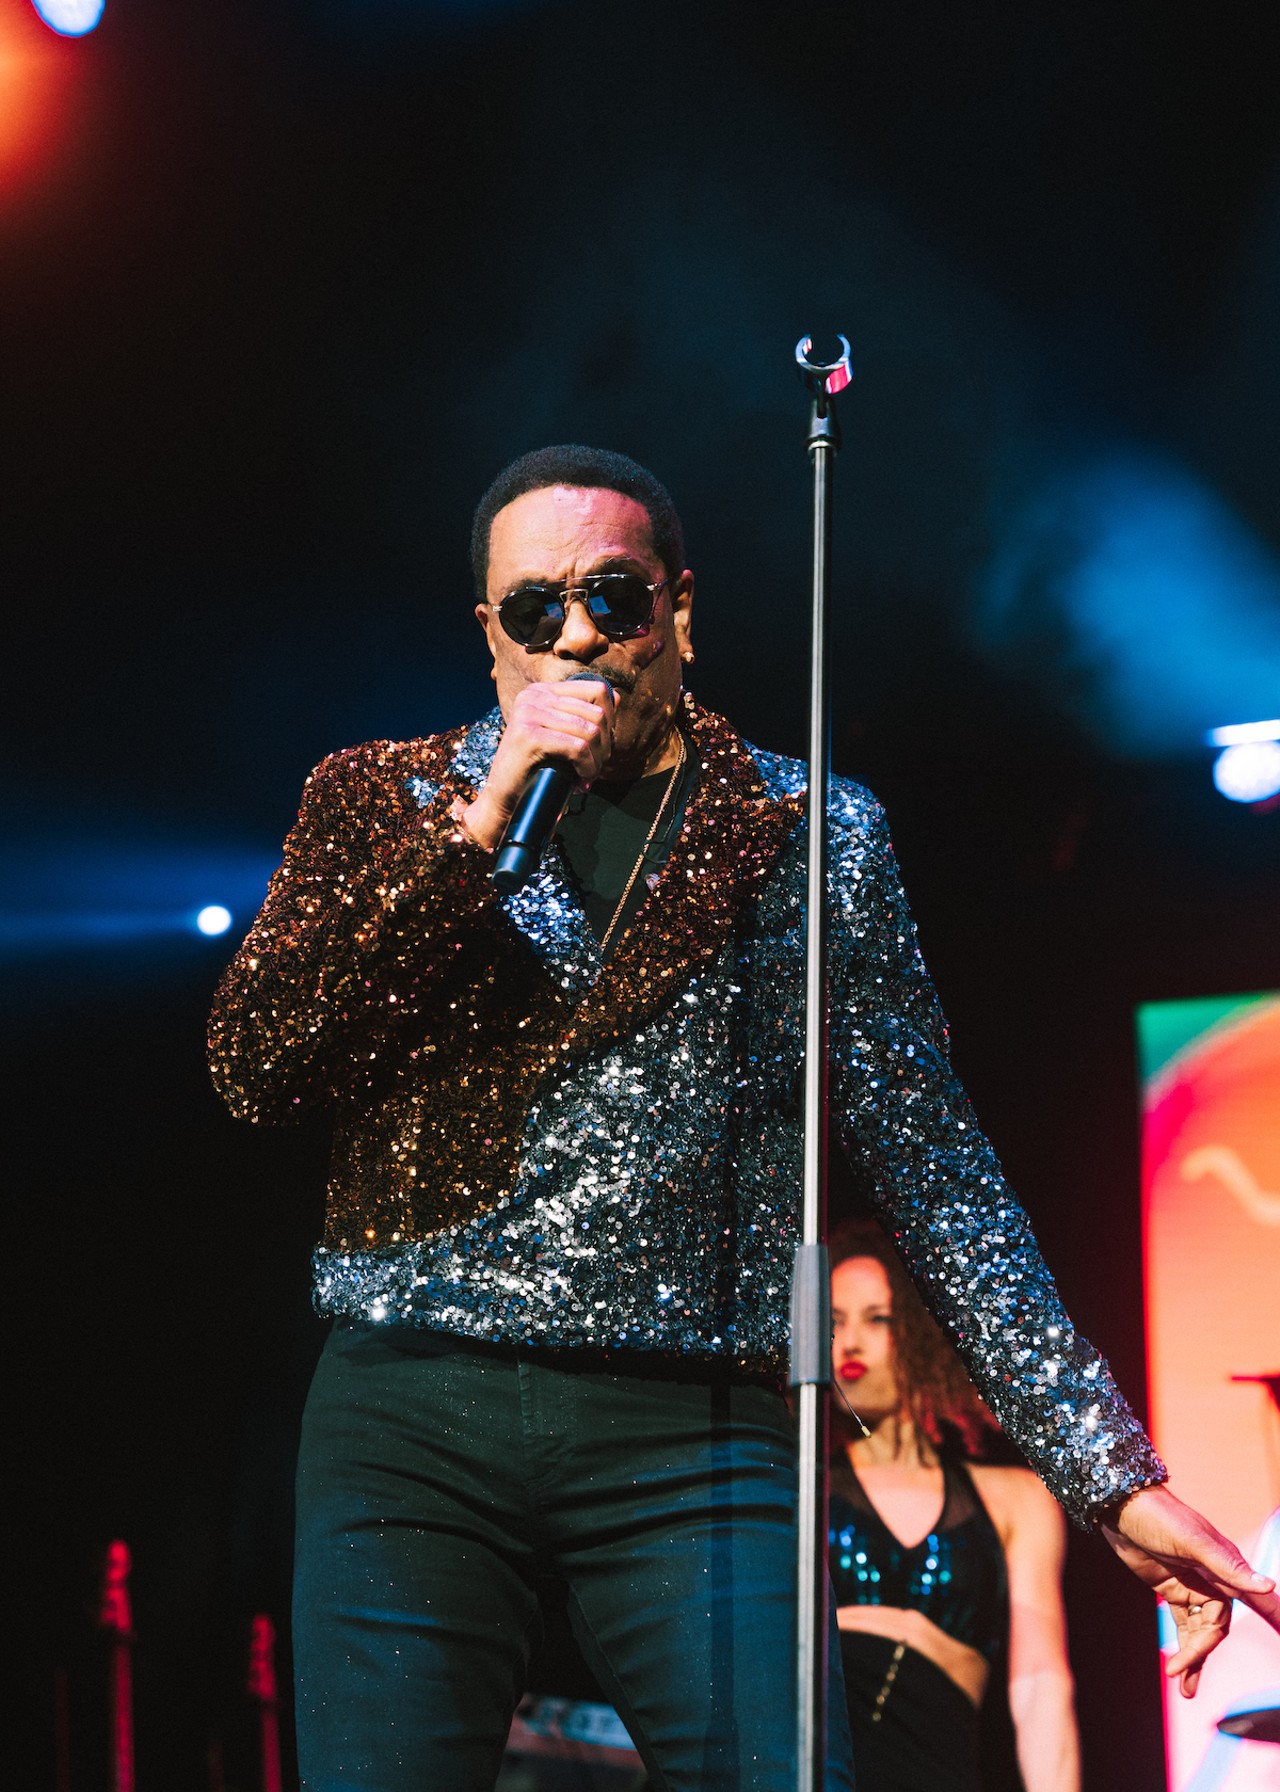 Photos: New Edition, Charlie Wilson and Jodeci bring 'The Culture' tour to Tampa